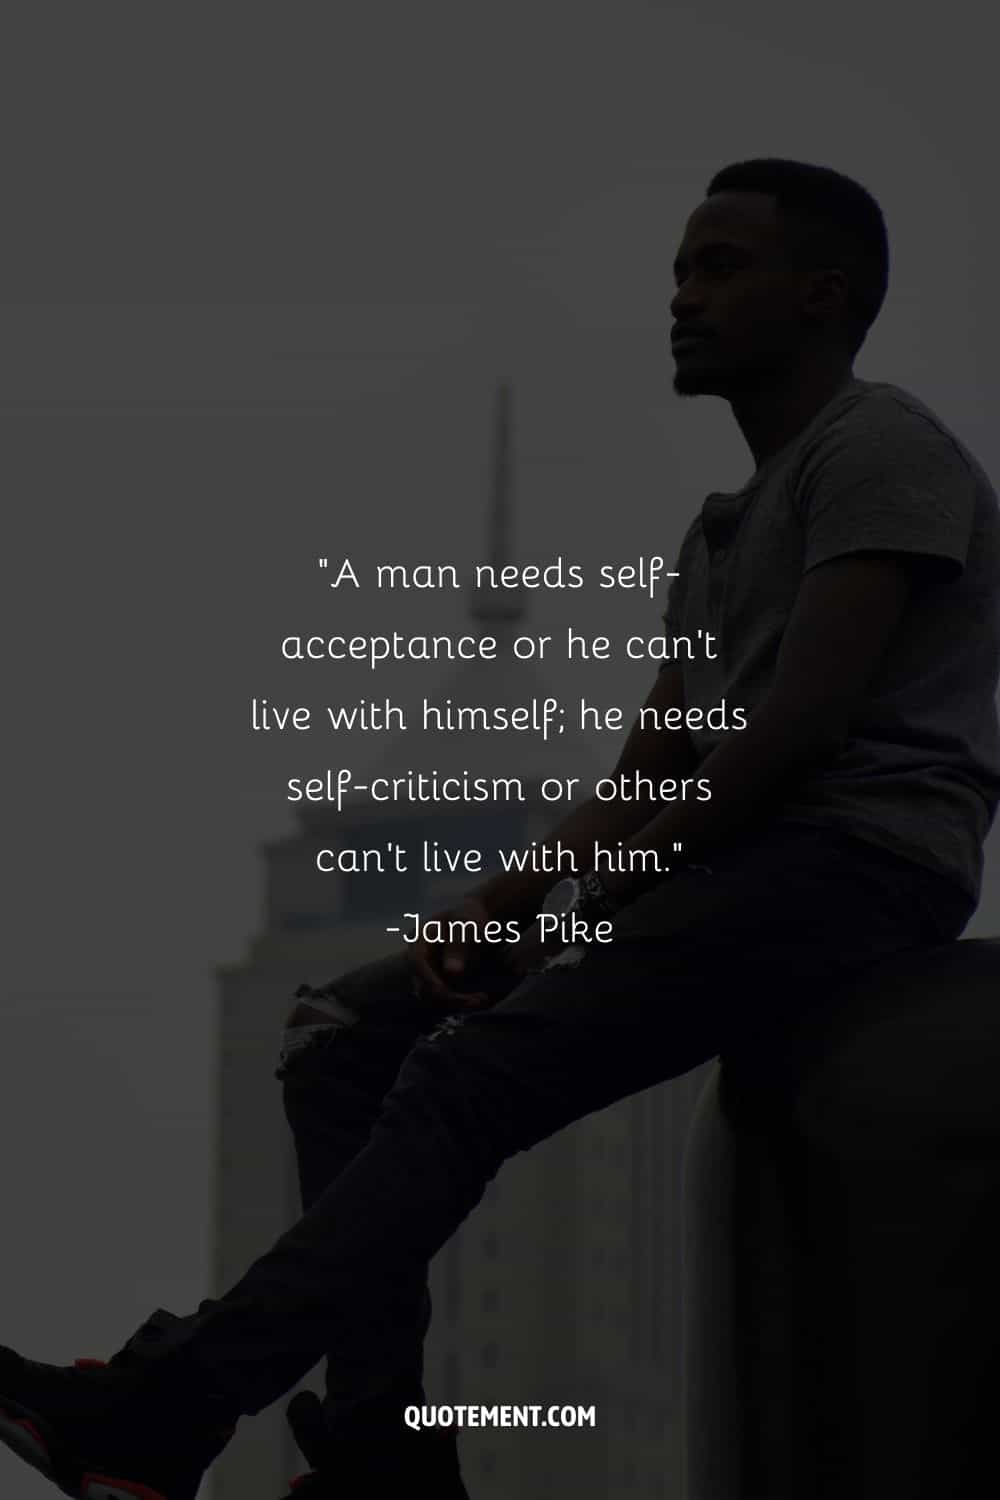 A man needs self-acceptance or he can’t live with himself; he needs self-criticism or others can’t live with him